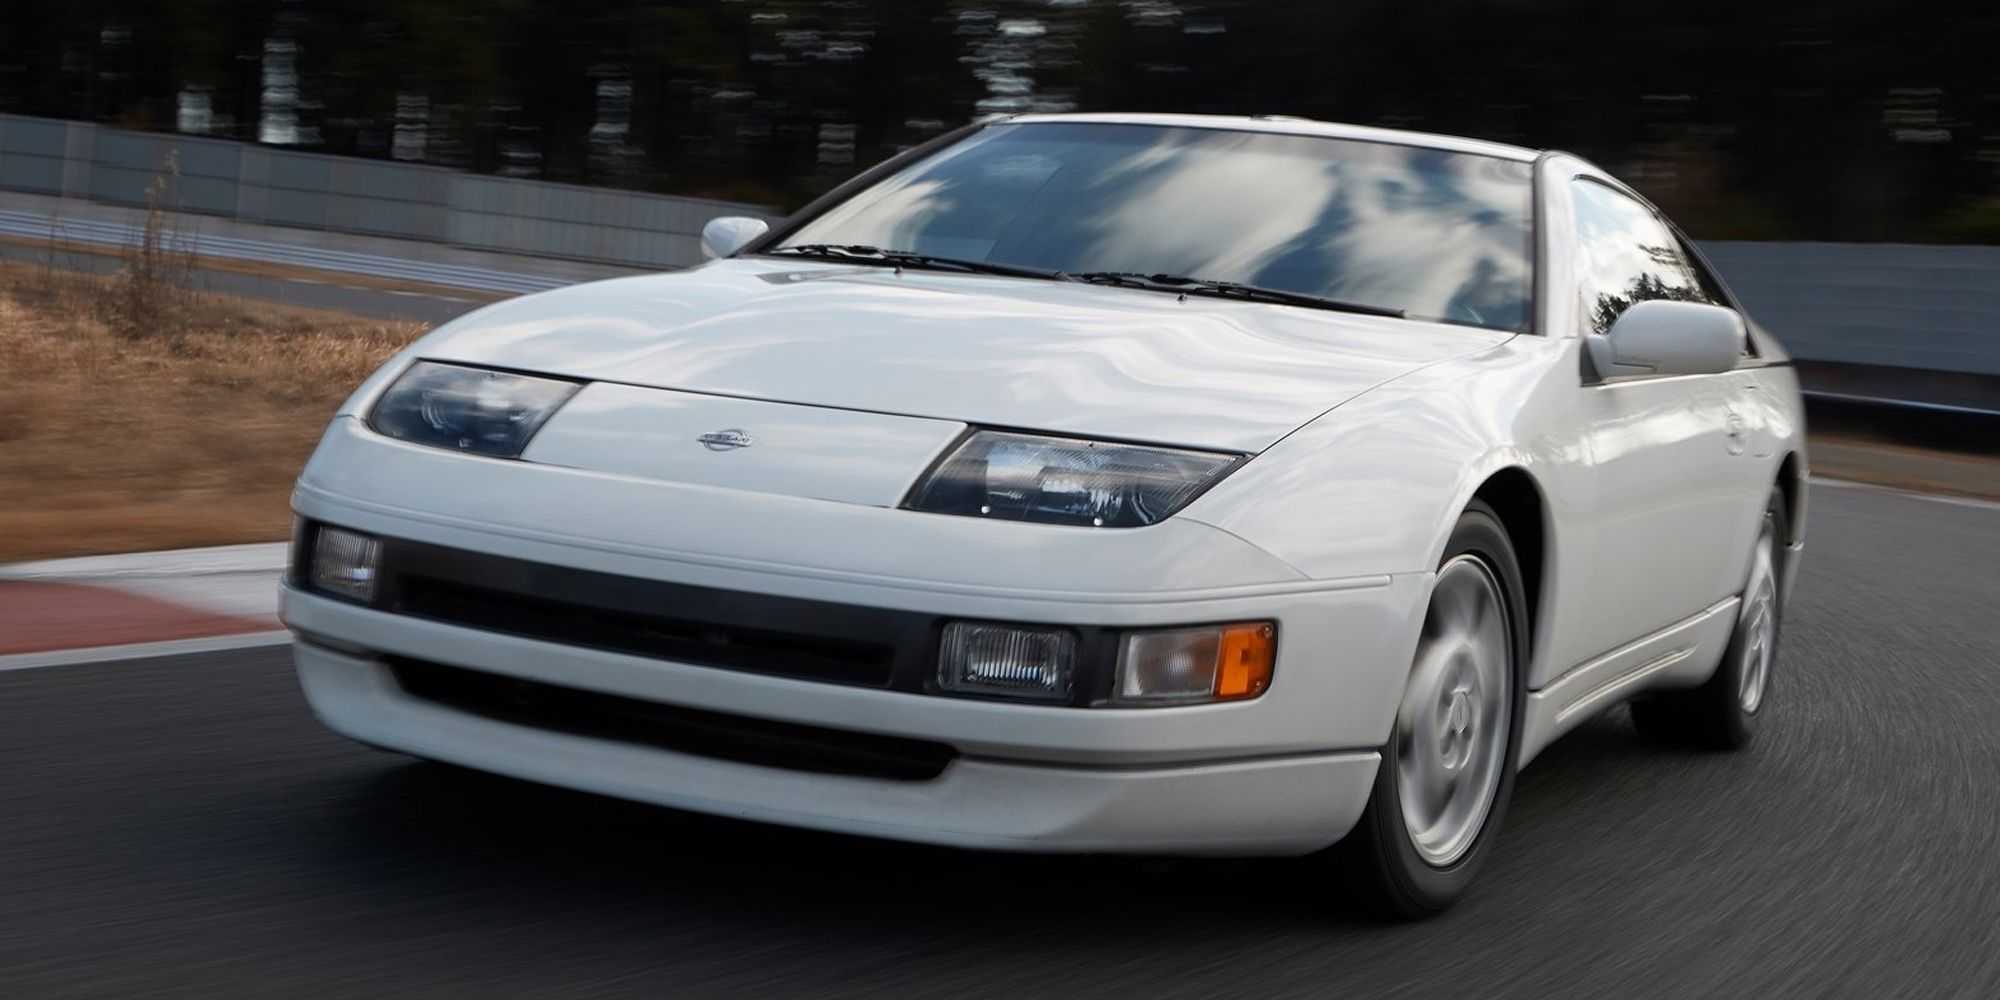 The front of a white 300ZX on track